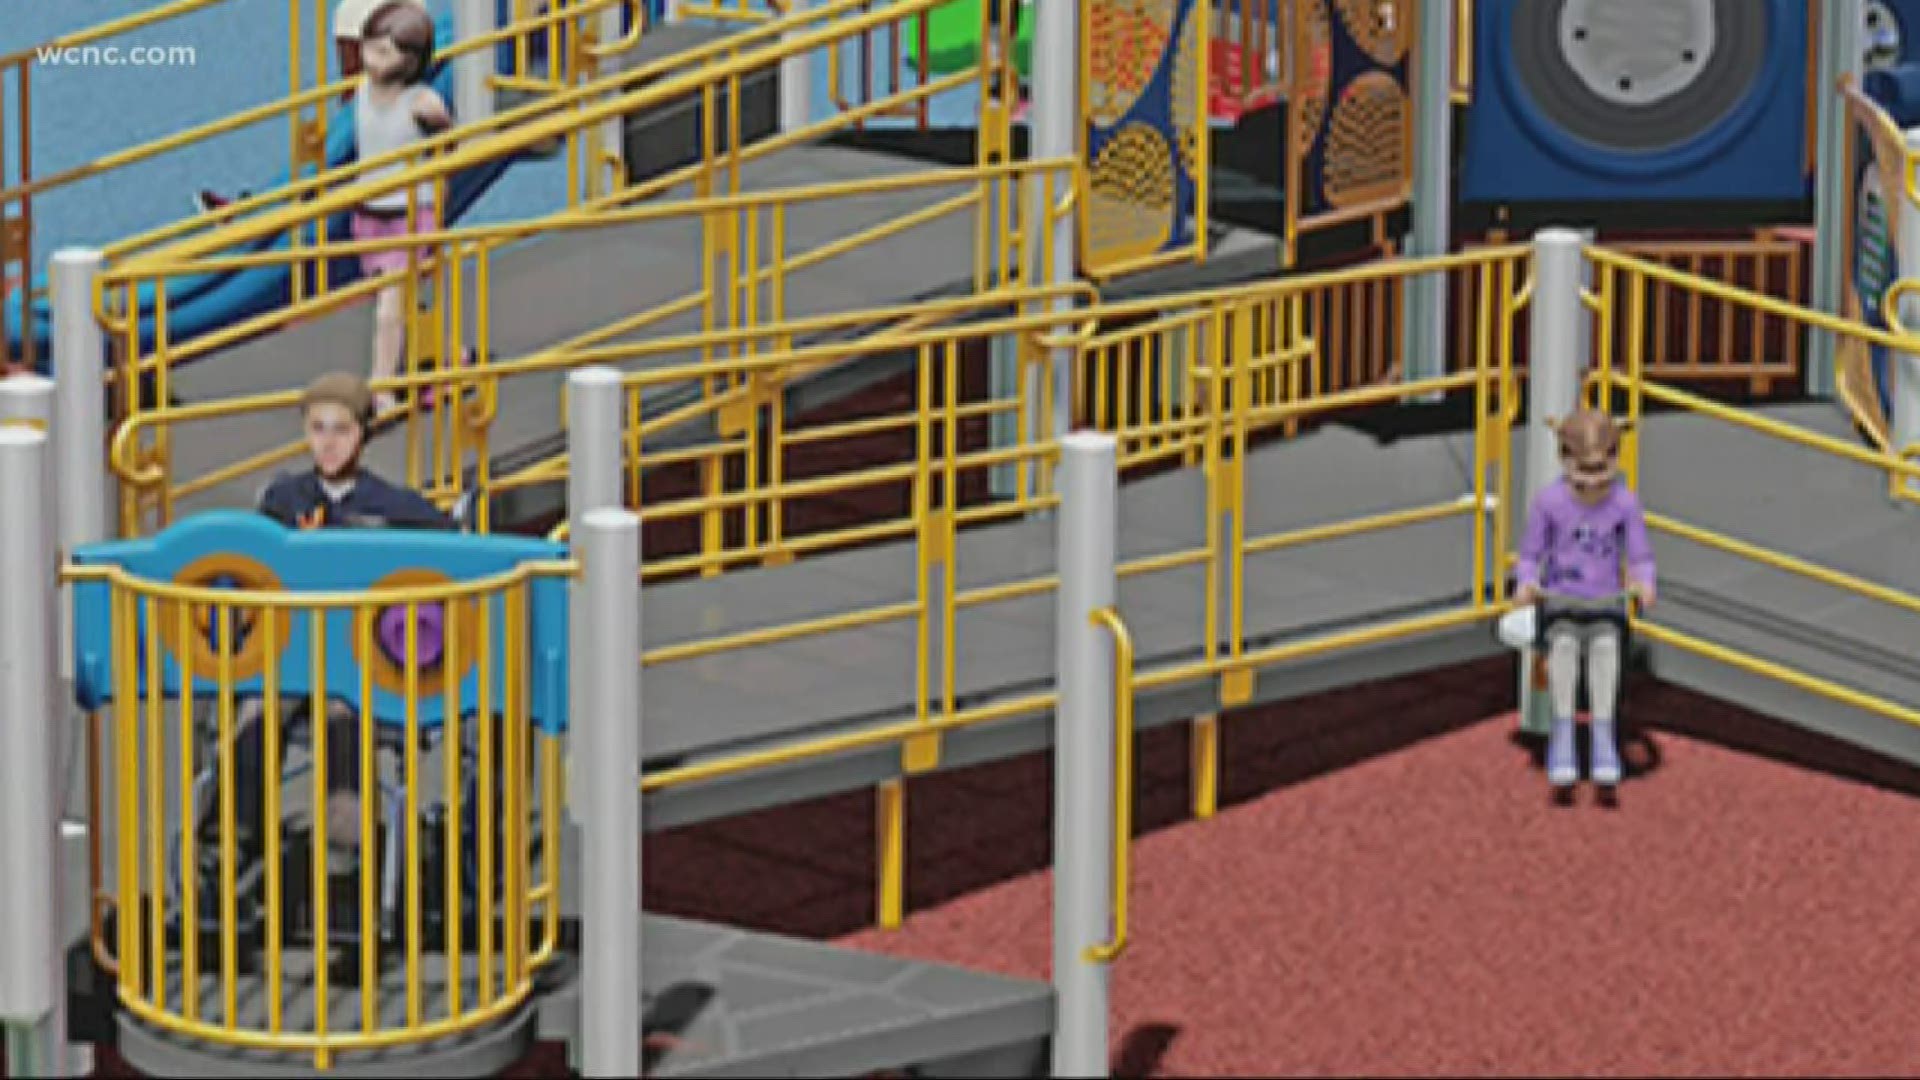 A playground in York County designed to give kids new access. It's aimed to offer children of all needs with a wide range of features.